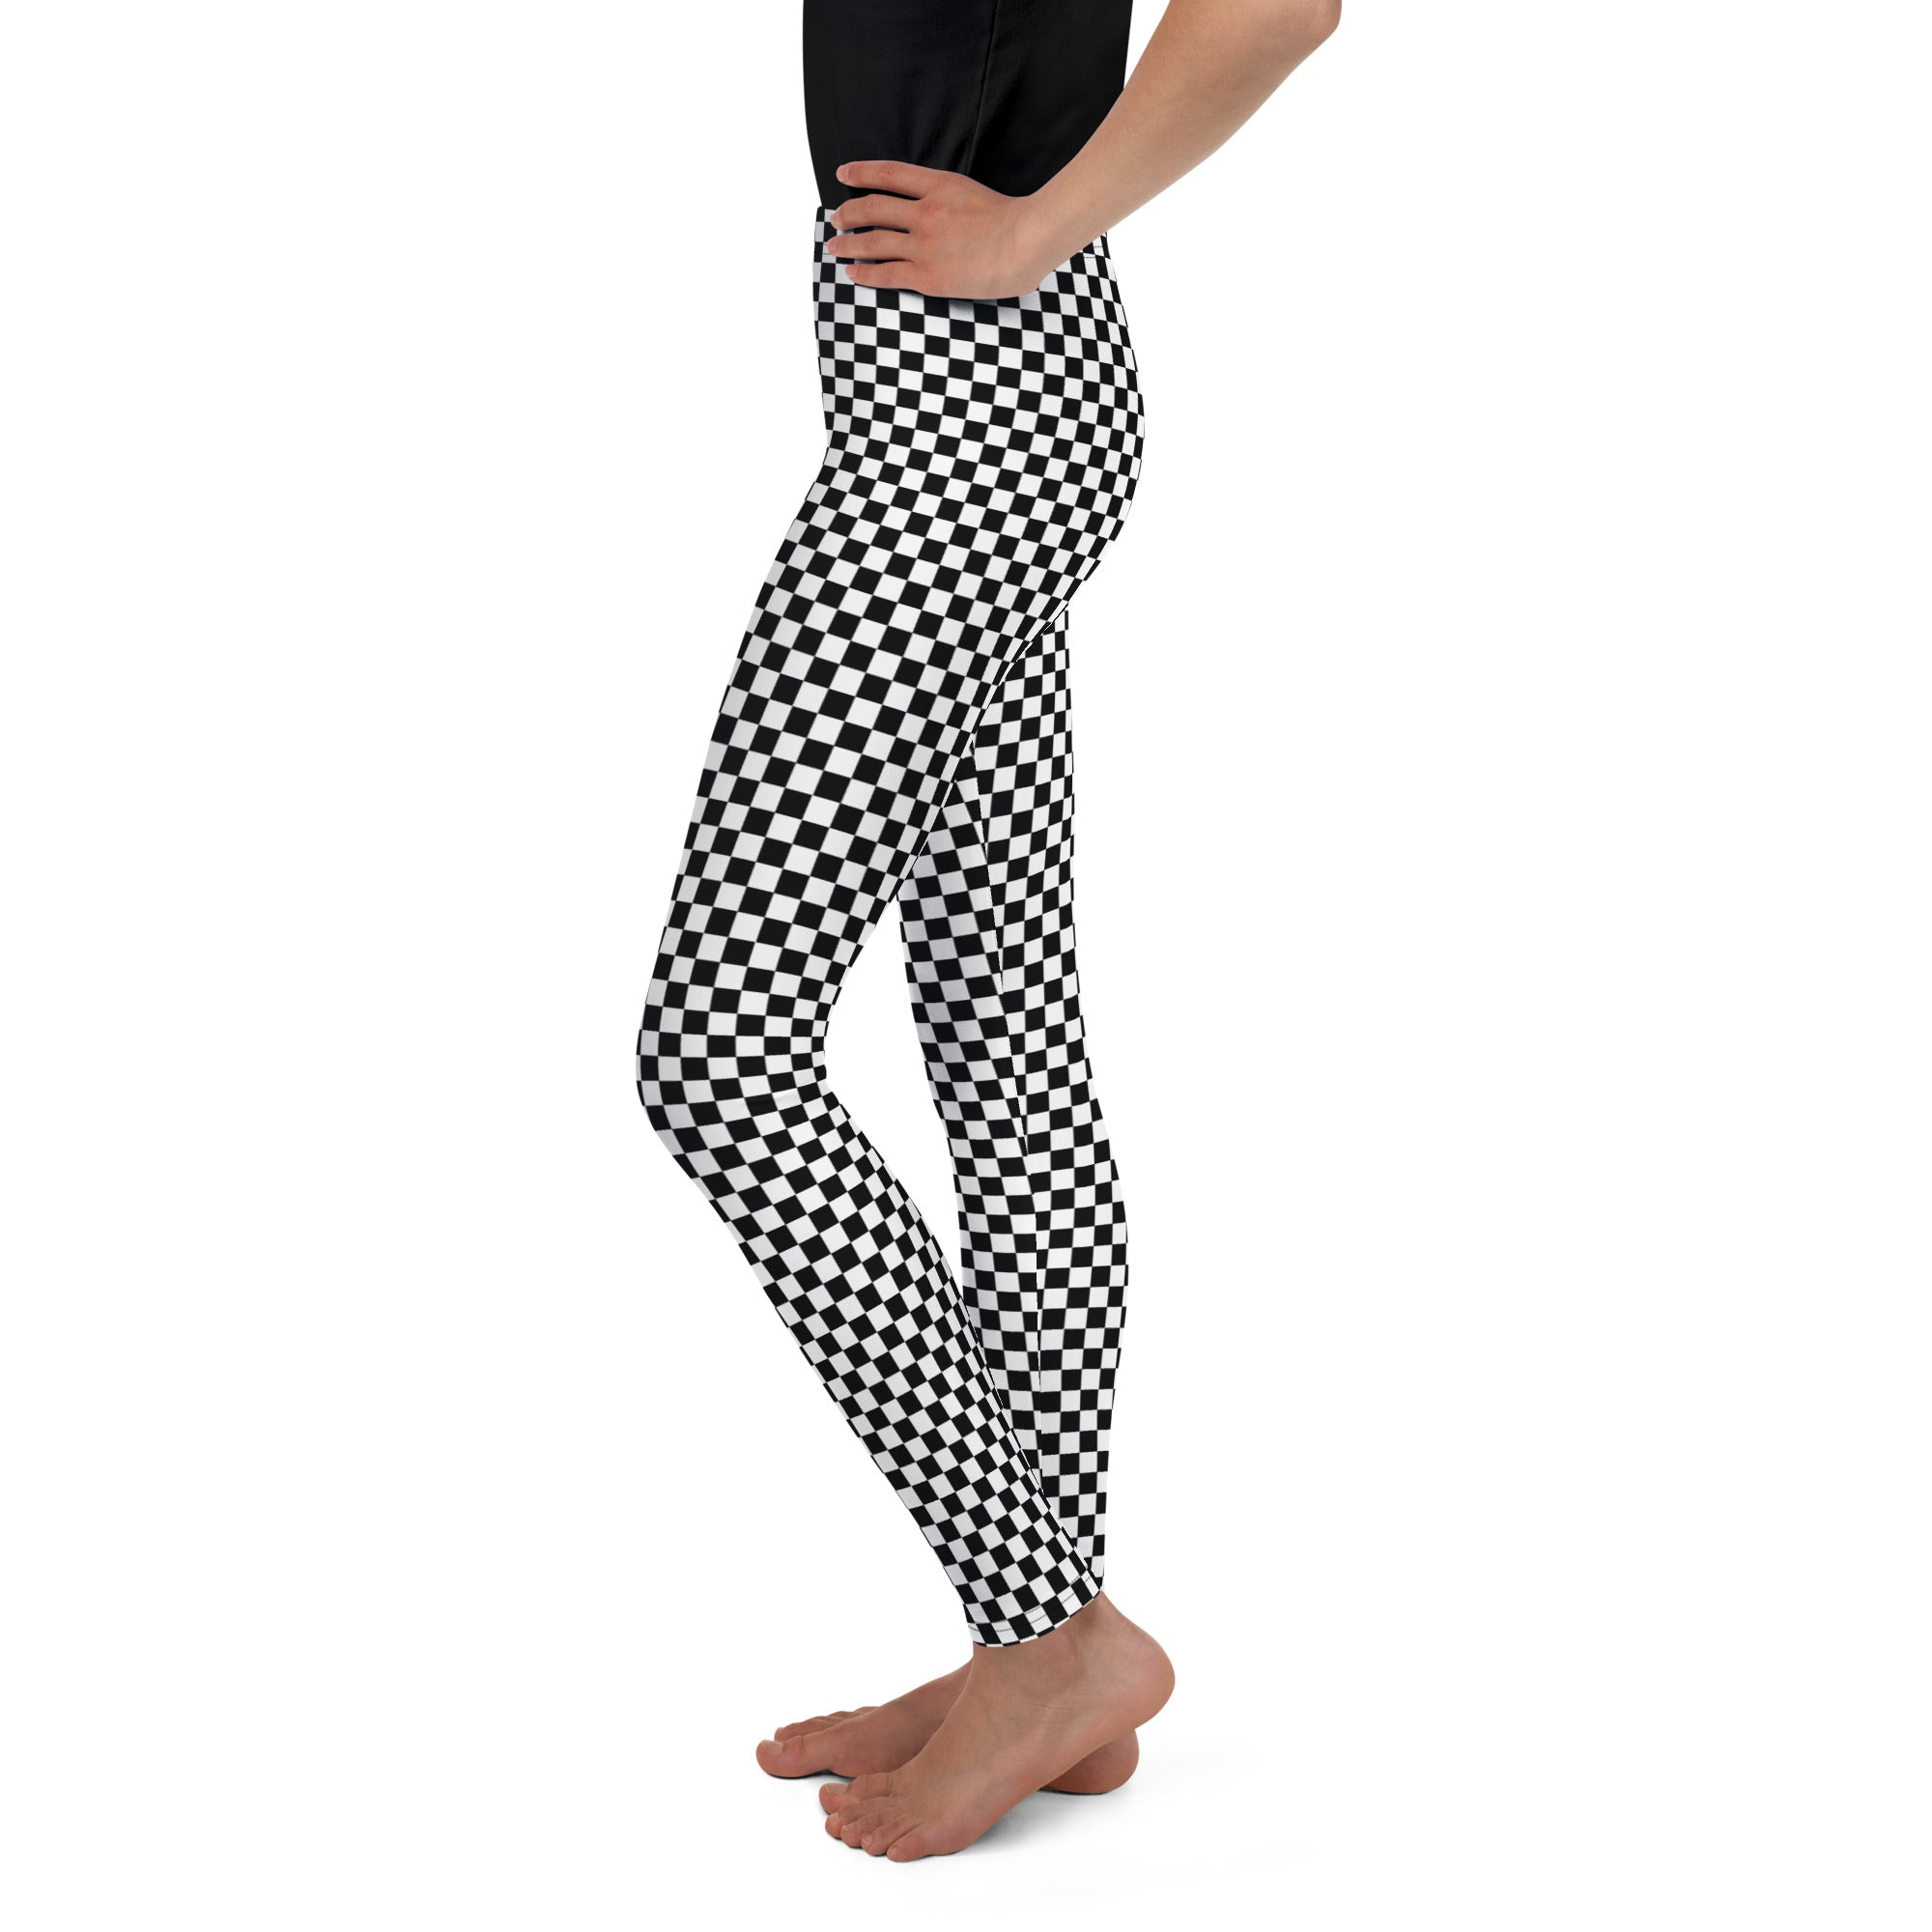 Checkered Youth Leggings